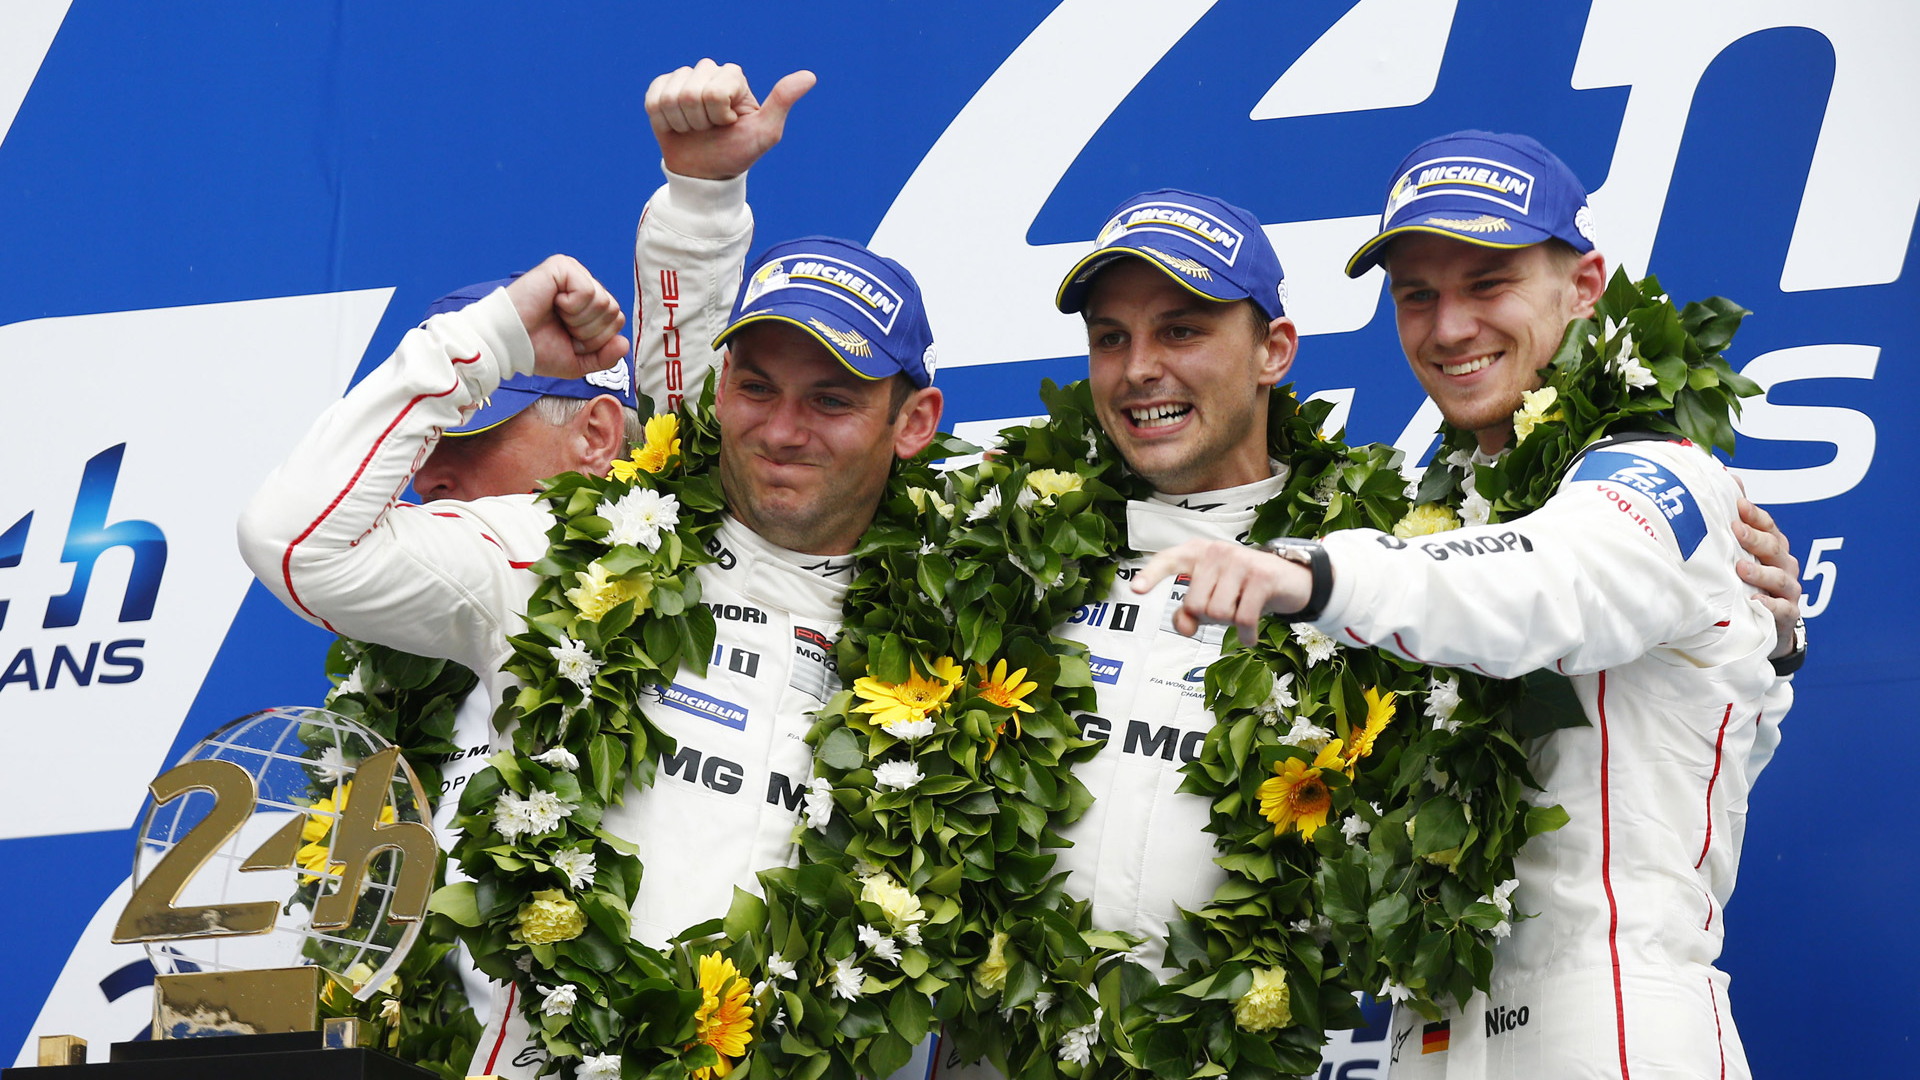 From left to right: Nick Tandy, Earl Bamber & Nico Huelkenberg after 2015 24 Hours of Le Mans win